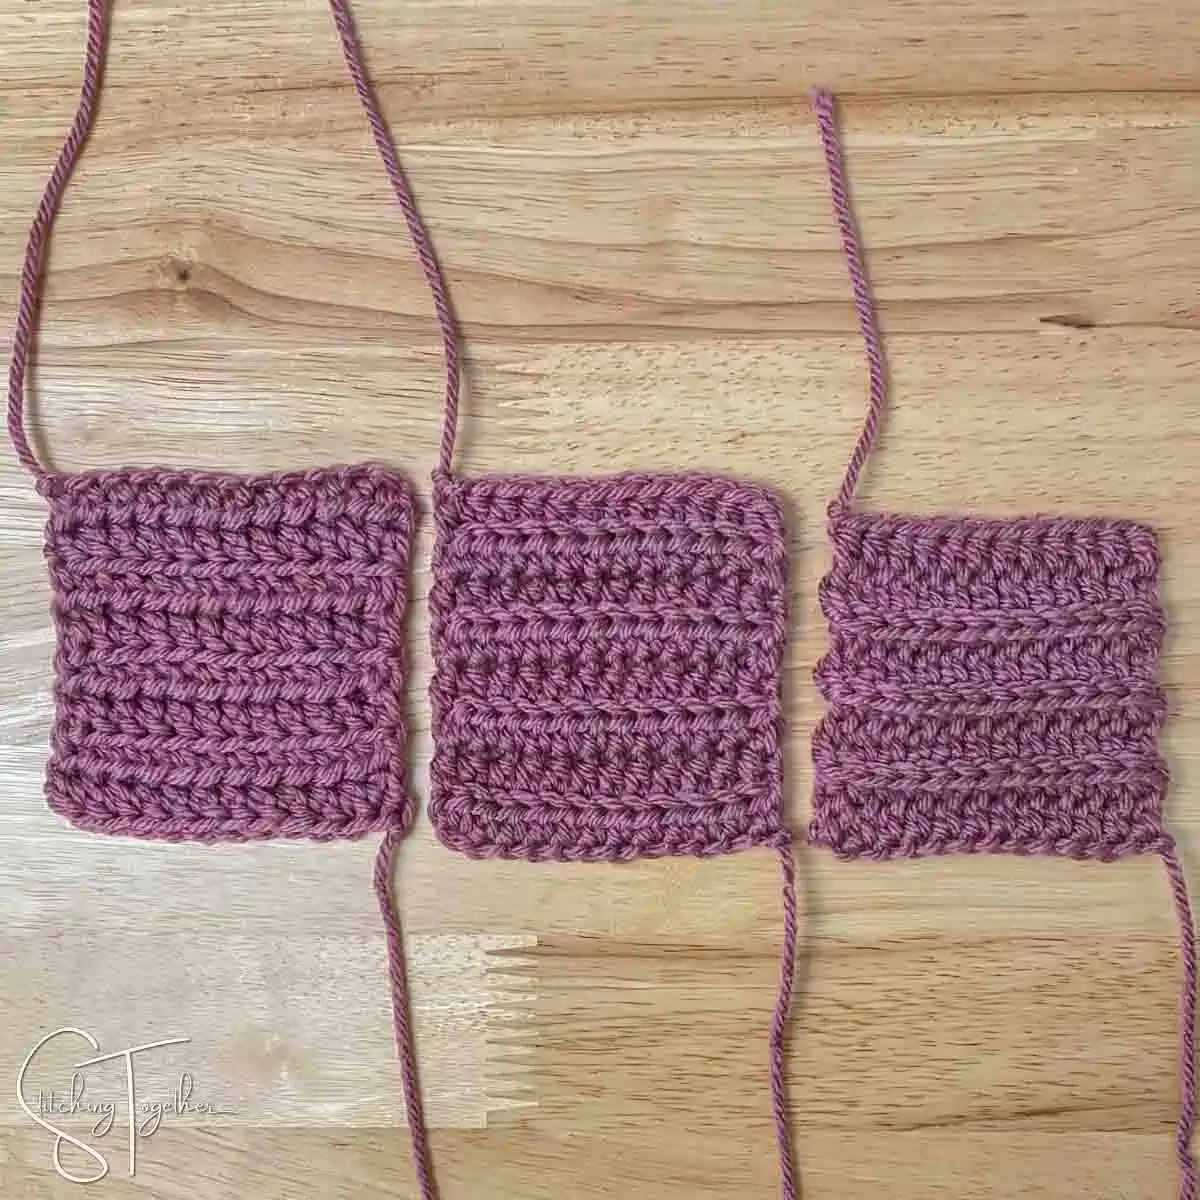 3 different crochet swatches